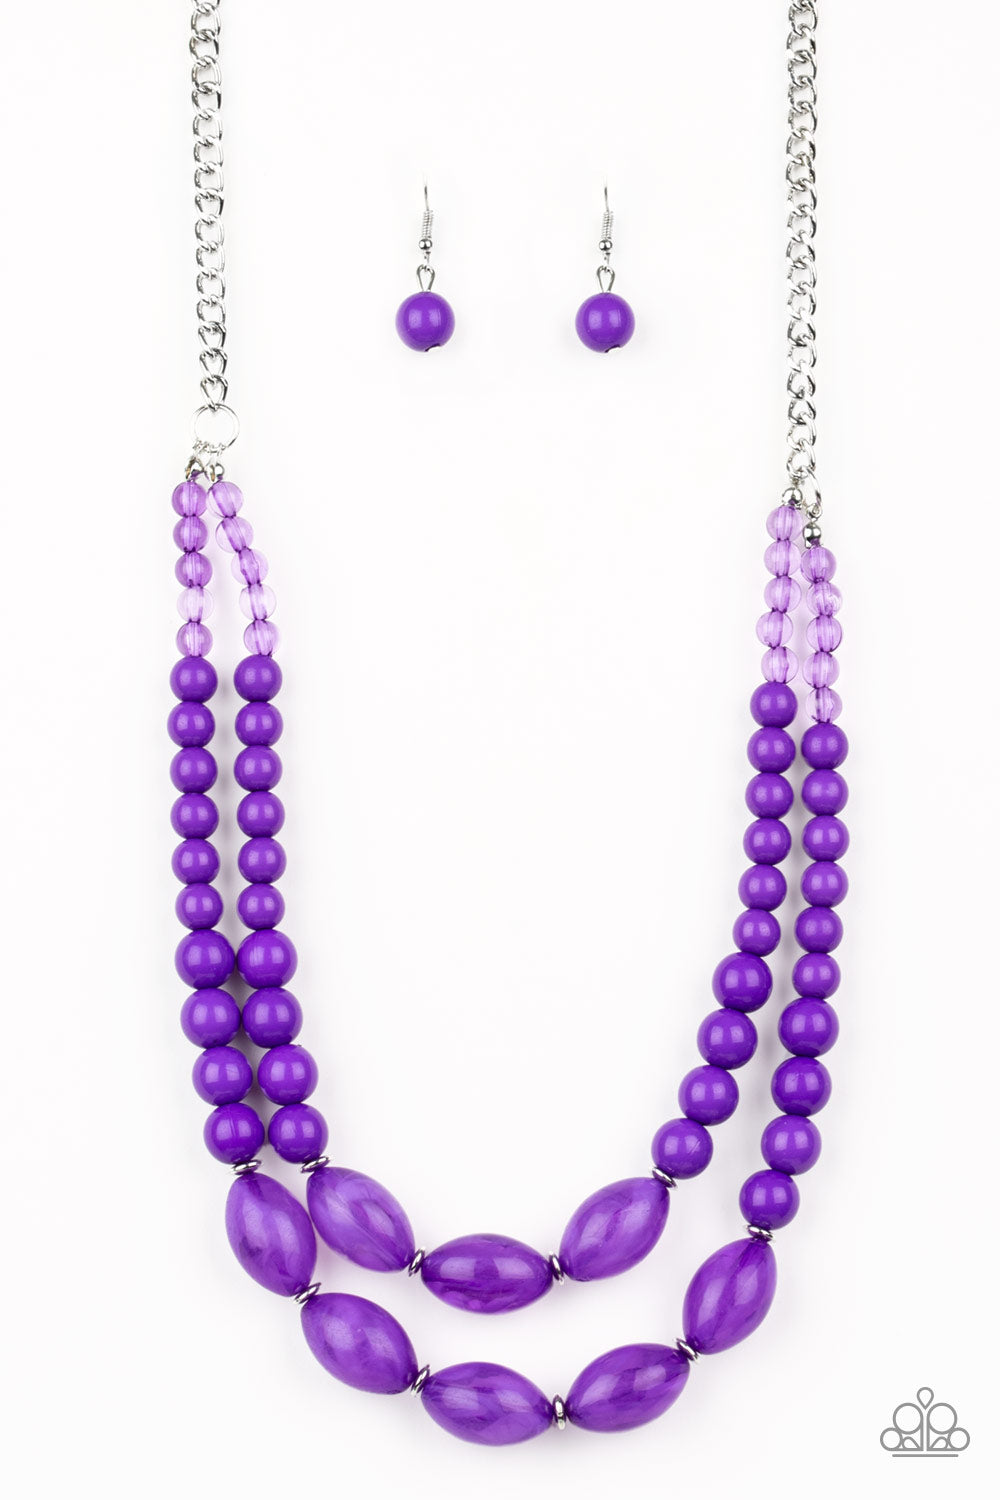 A collection of glassy, polished, and cloudy purple beads are threaded along two invisible wires below the collar for a beautiful pop of color. Features an adjustable clasp closure.